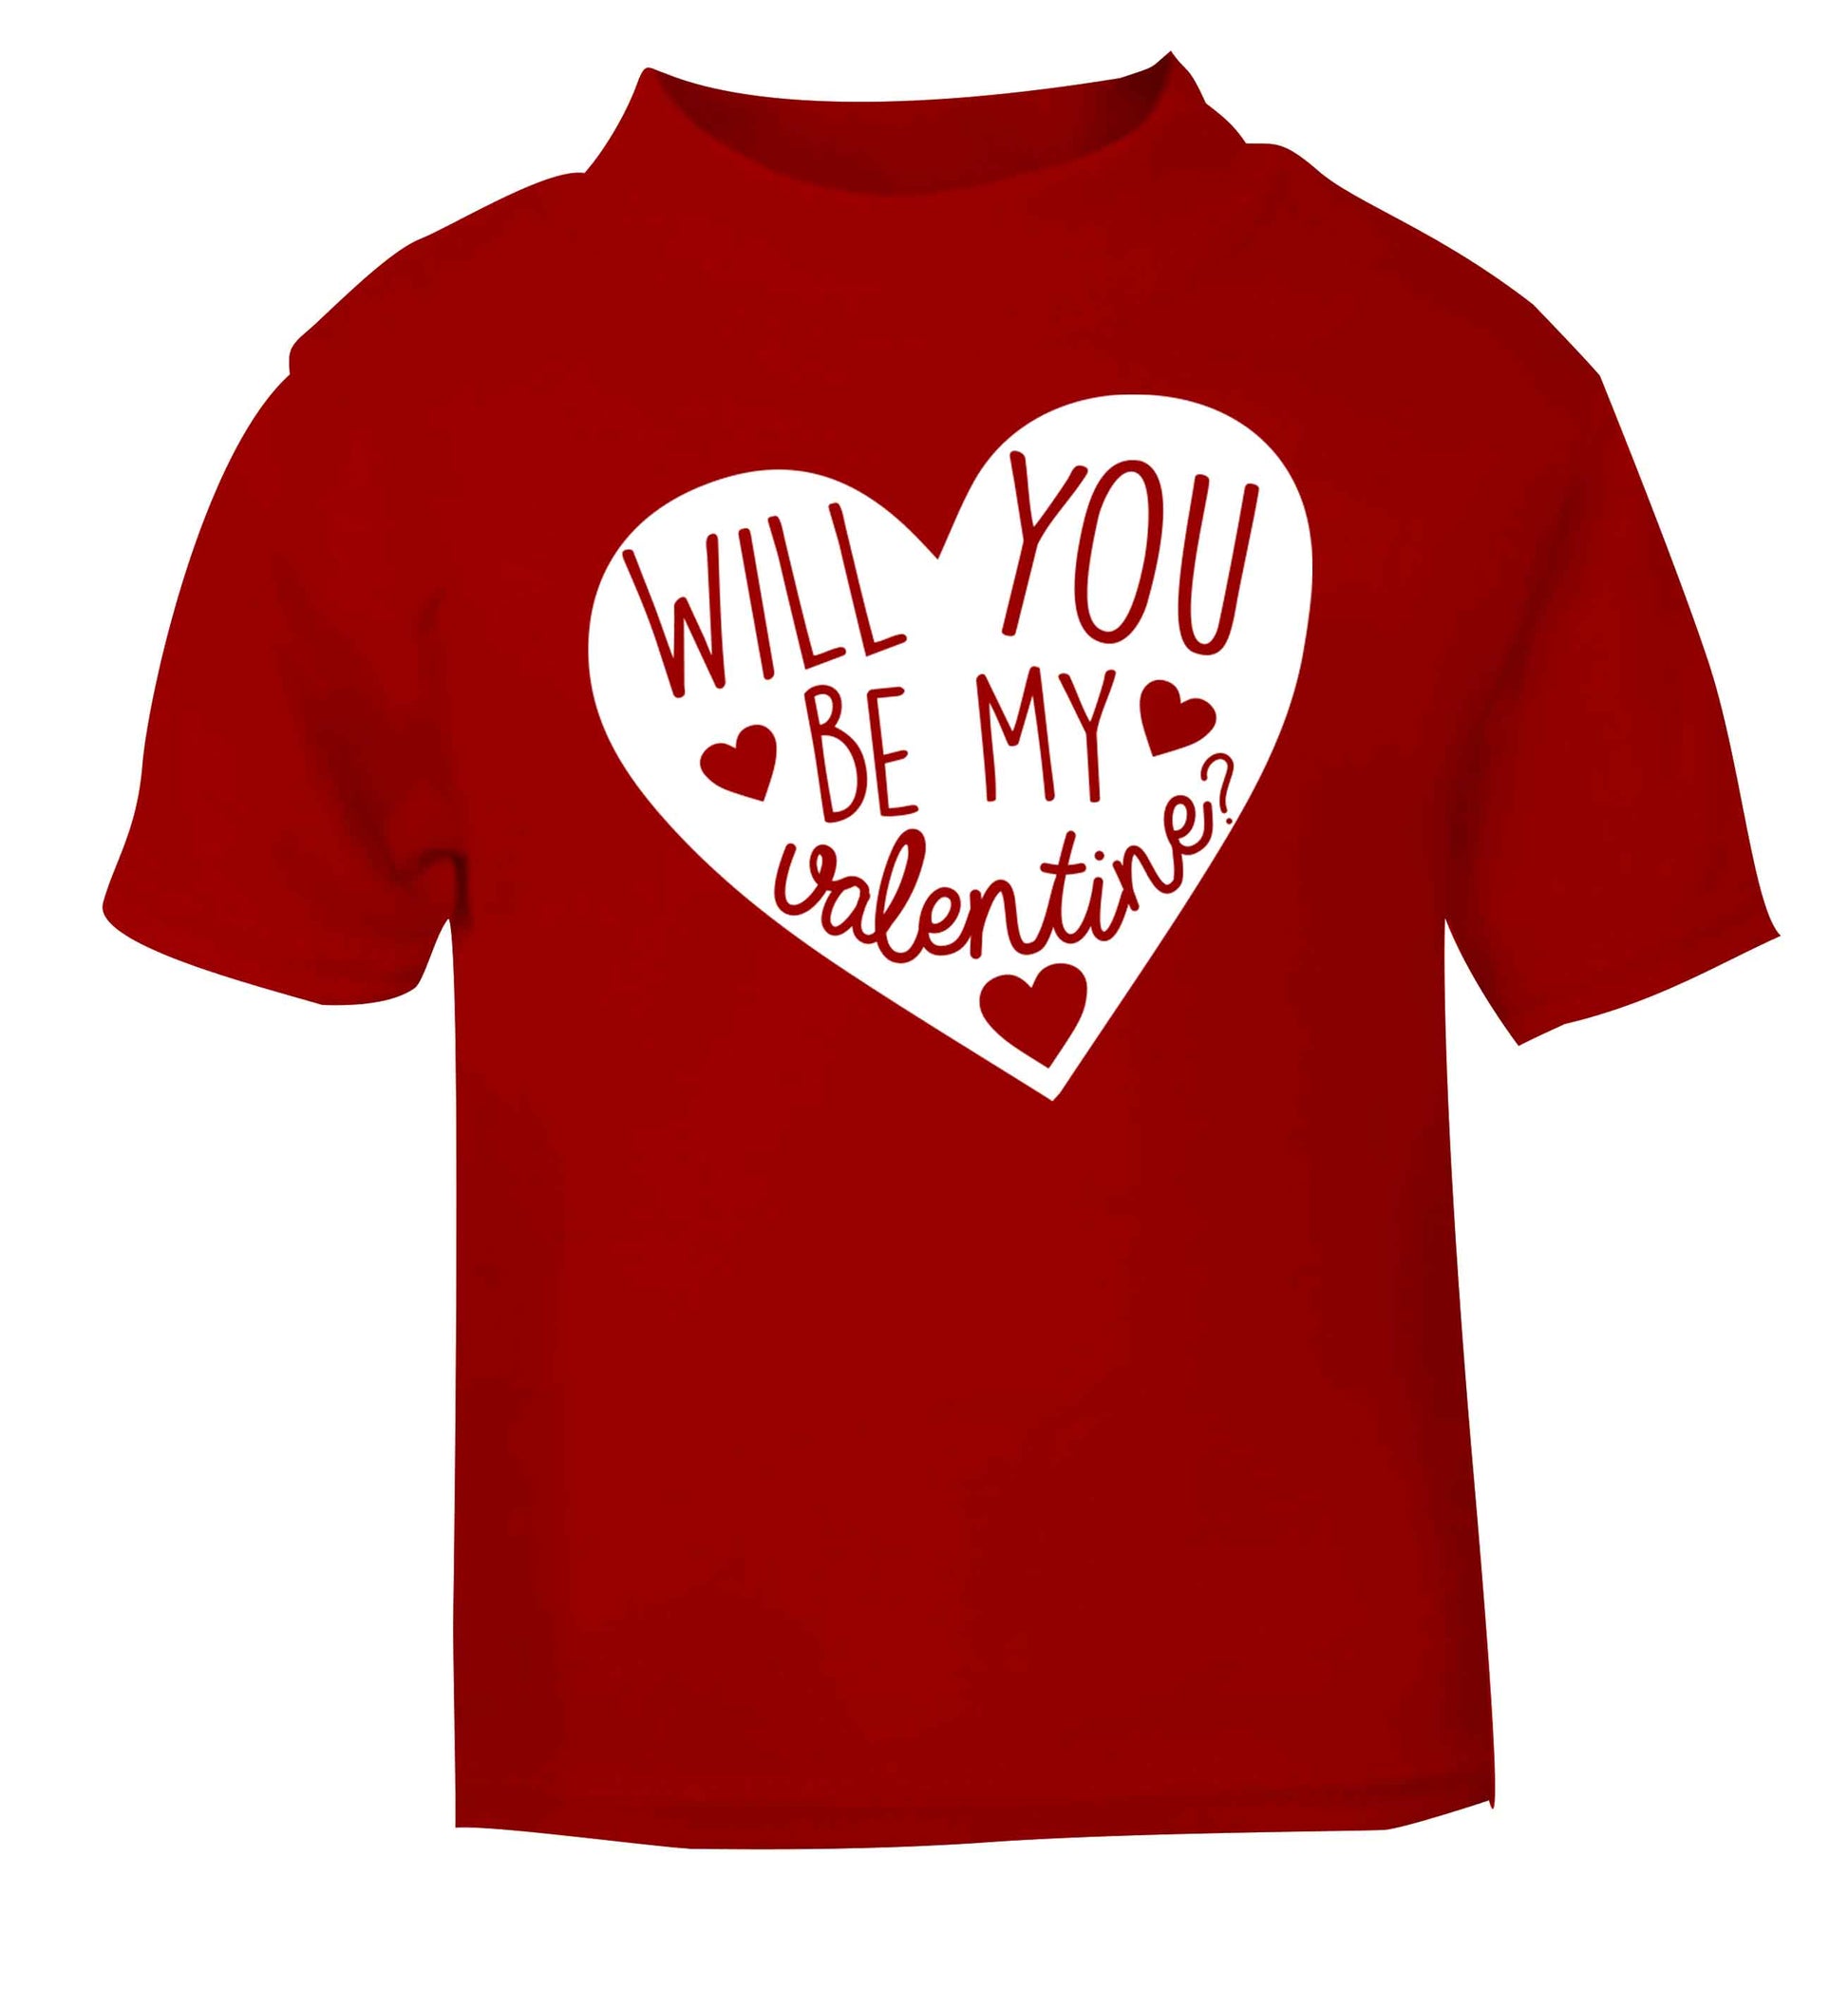 Will you be my valentine? red baby toddler Tshirt 2 Years